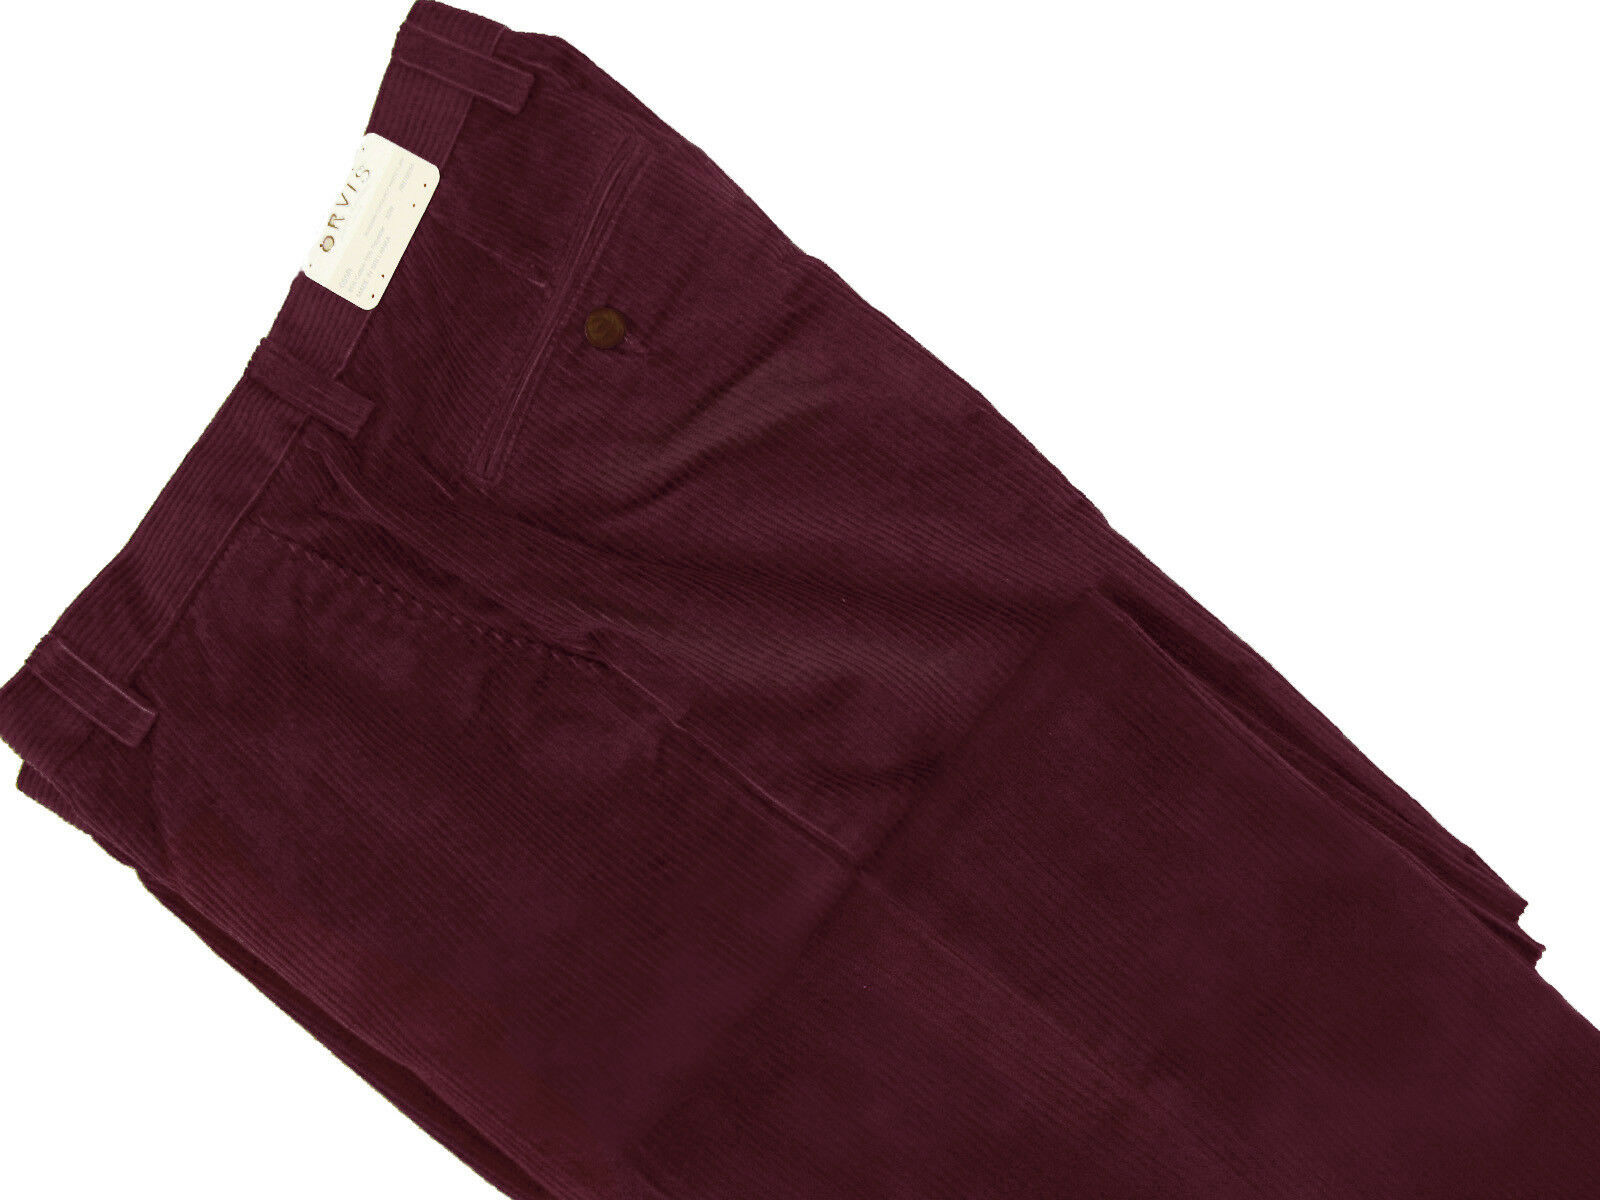 Primary image for NEW $179 Orvis Wellington Super Cords Pants!  32 x 30 (29.5)  Flat Front  Maroon